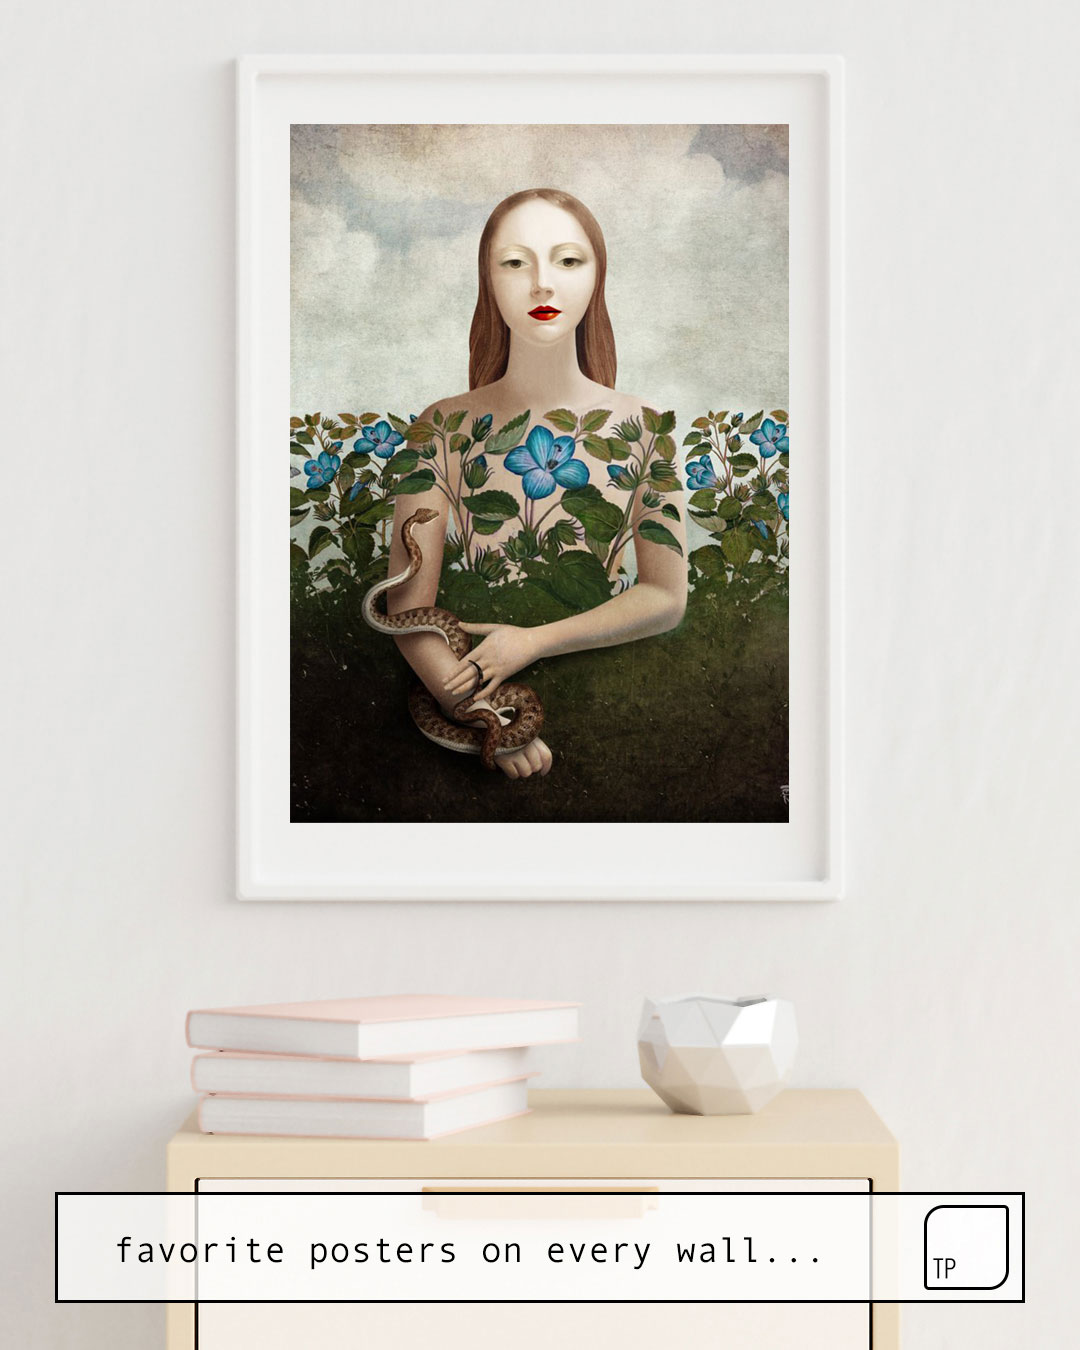 The photo shows an example of furnishing with the motif EVA AND THE GARDEN by Christian Schloe as mural